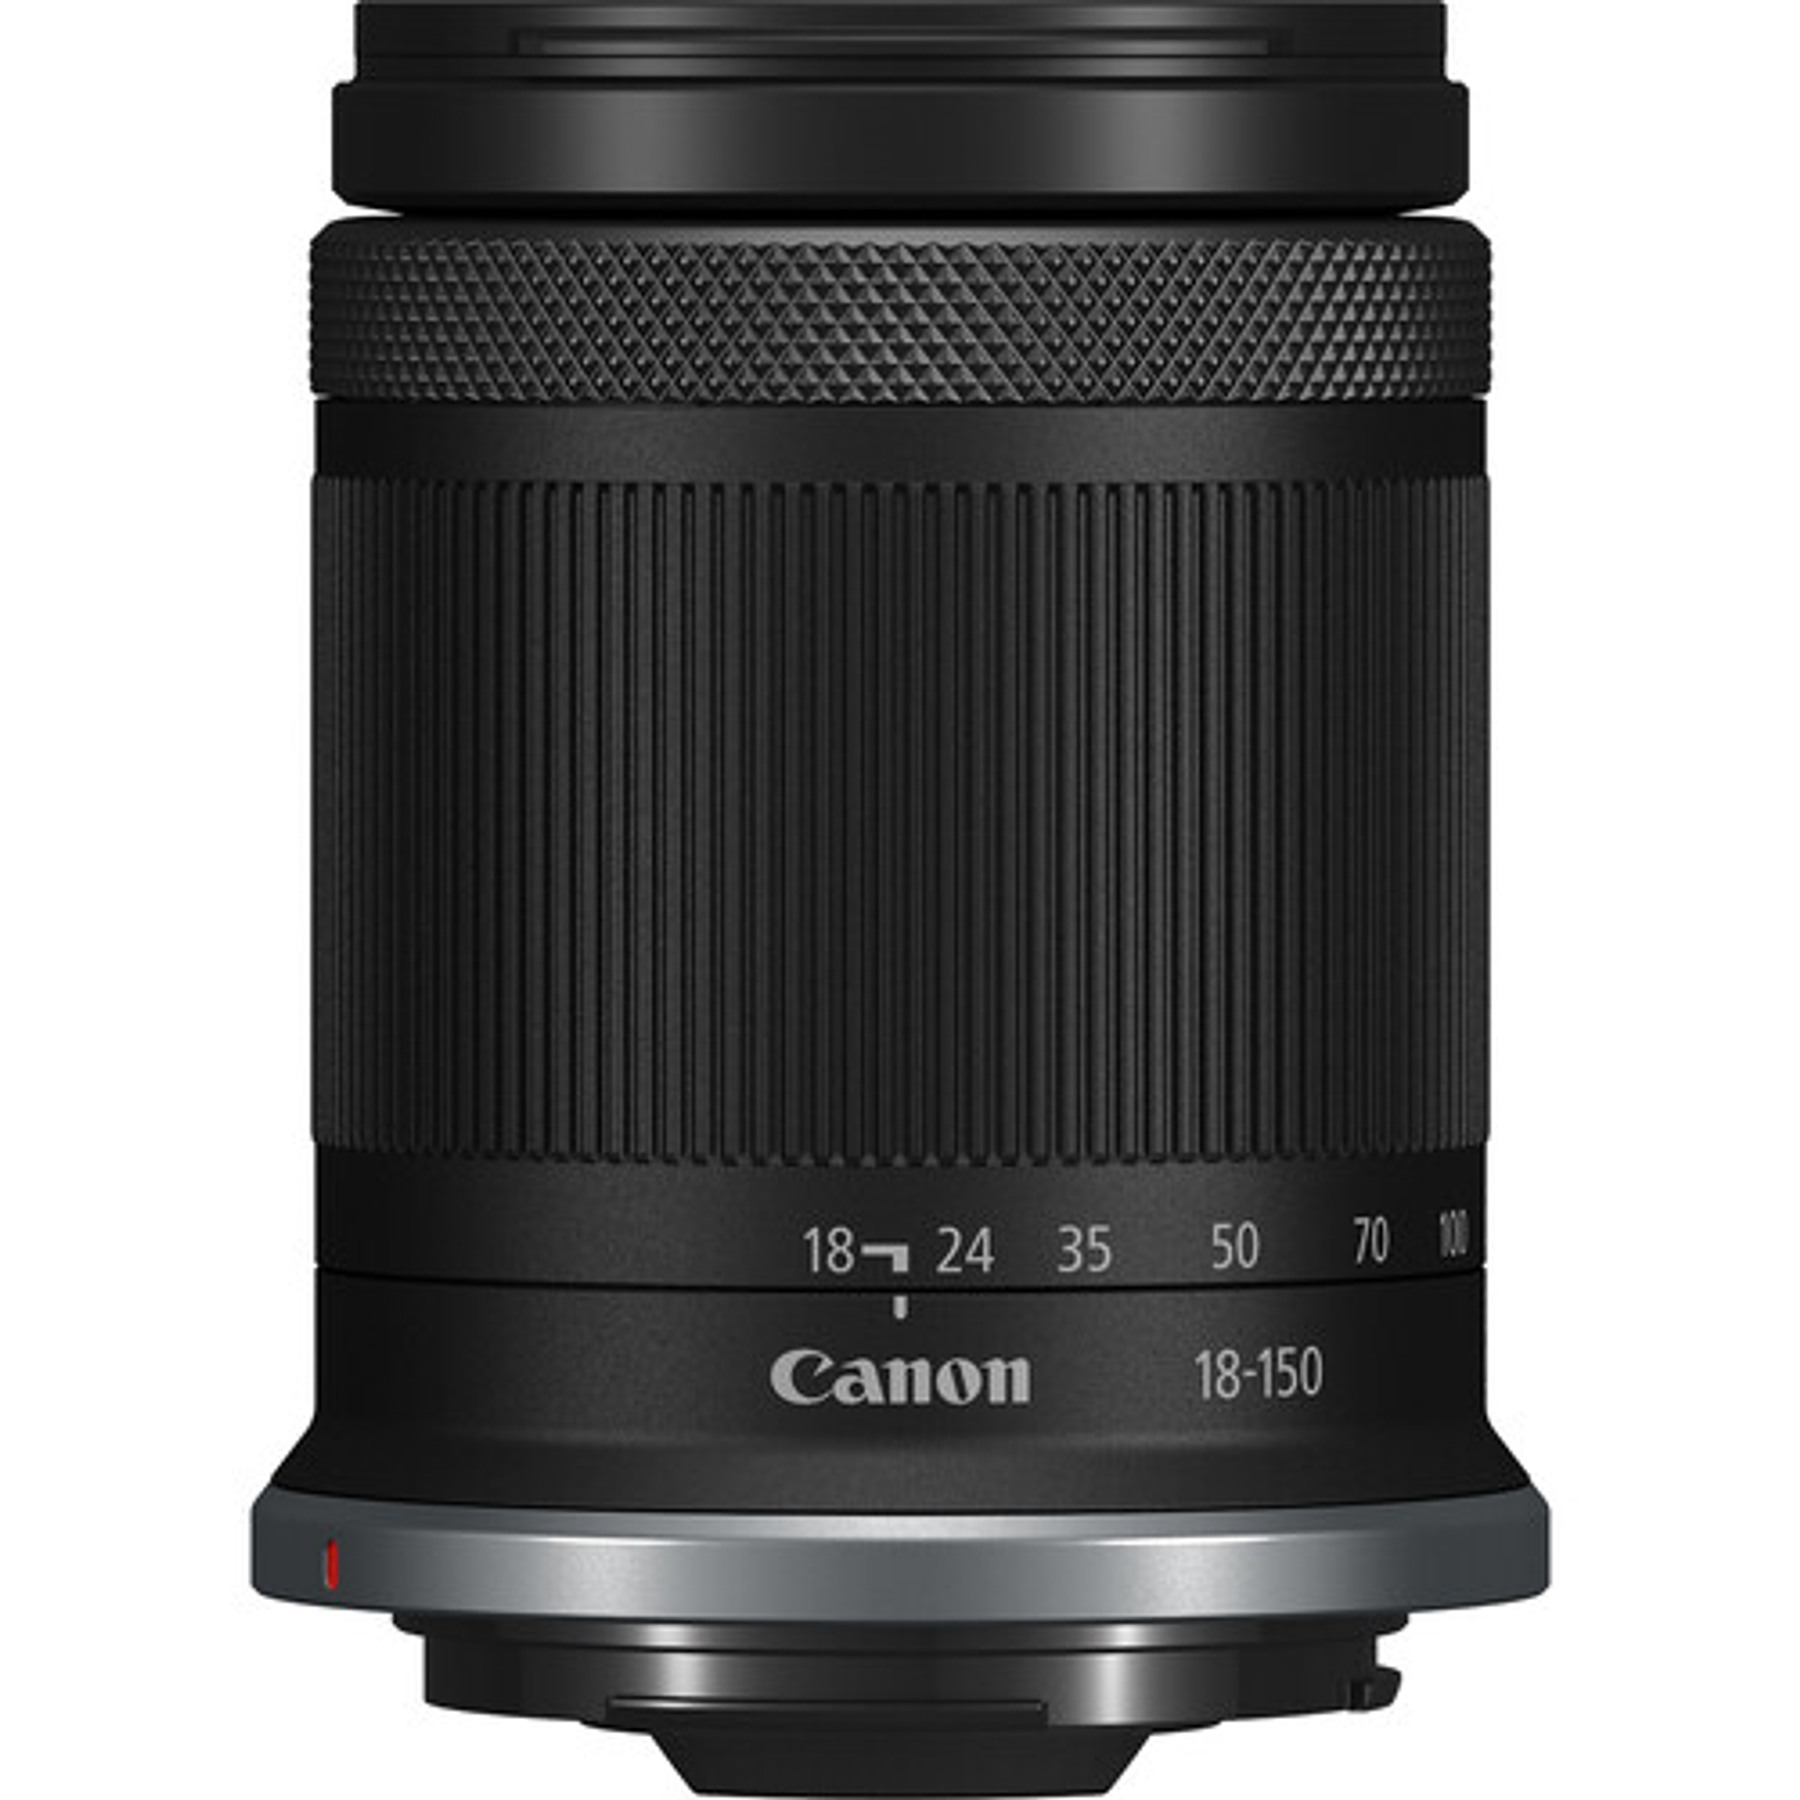 CANON EOS R7 RF-S + LENTE 18-150mm f/3.5-6.3 IS STM